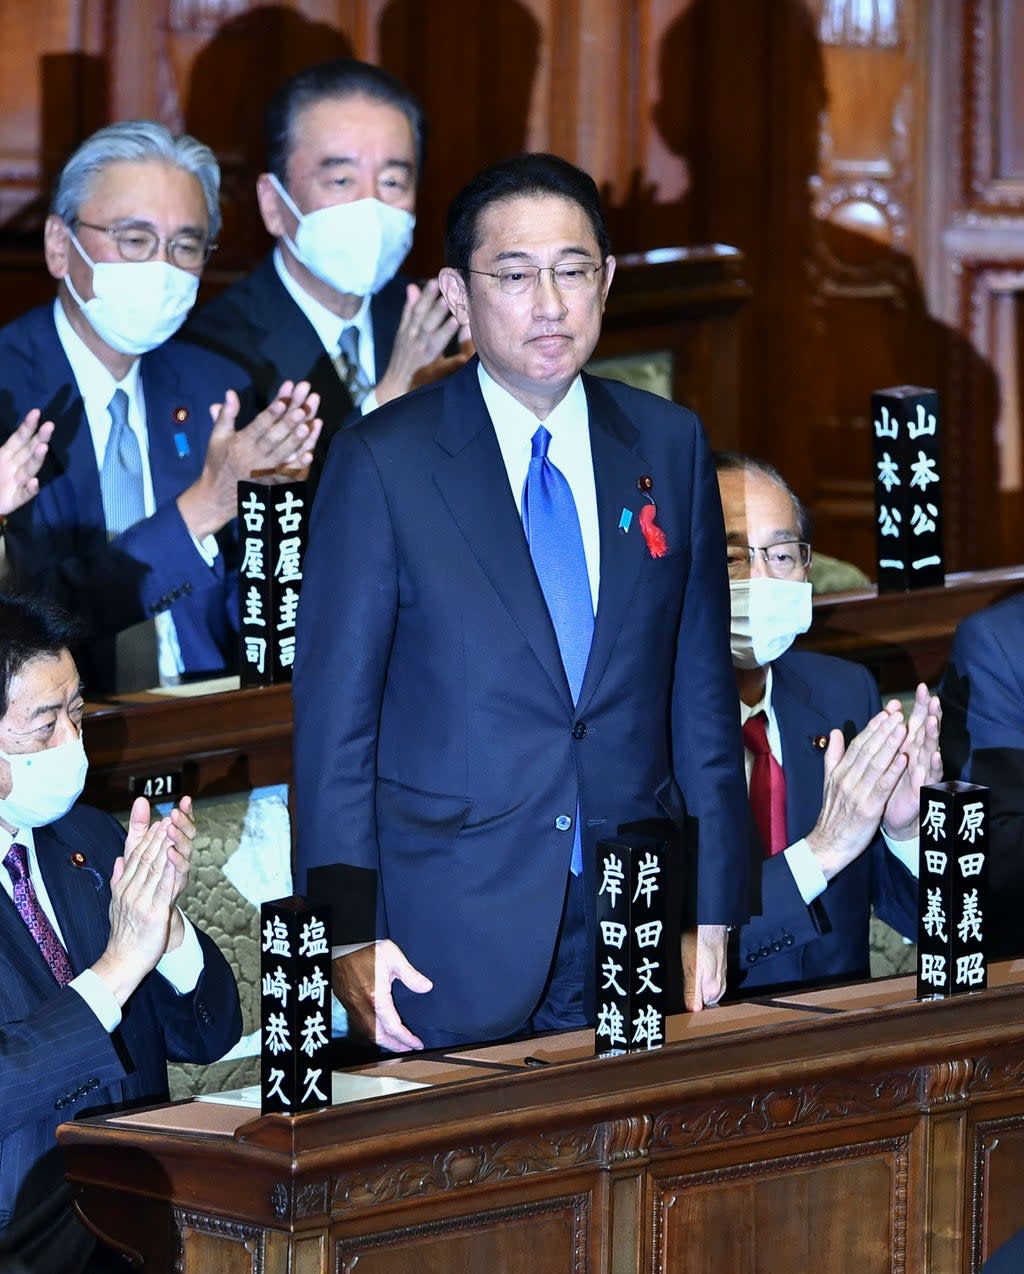 Japan hanged three death row inmates on Tuesday, the first under prime minister Fumio Kishida (AFP/Getty)